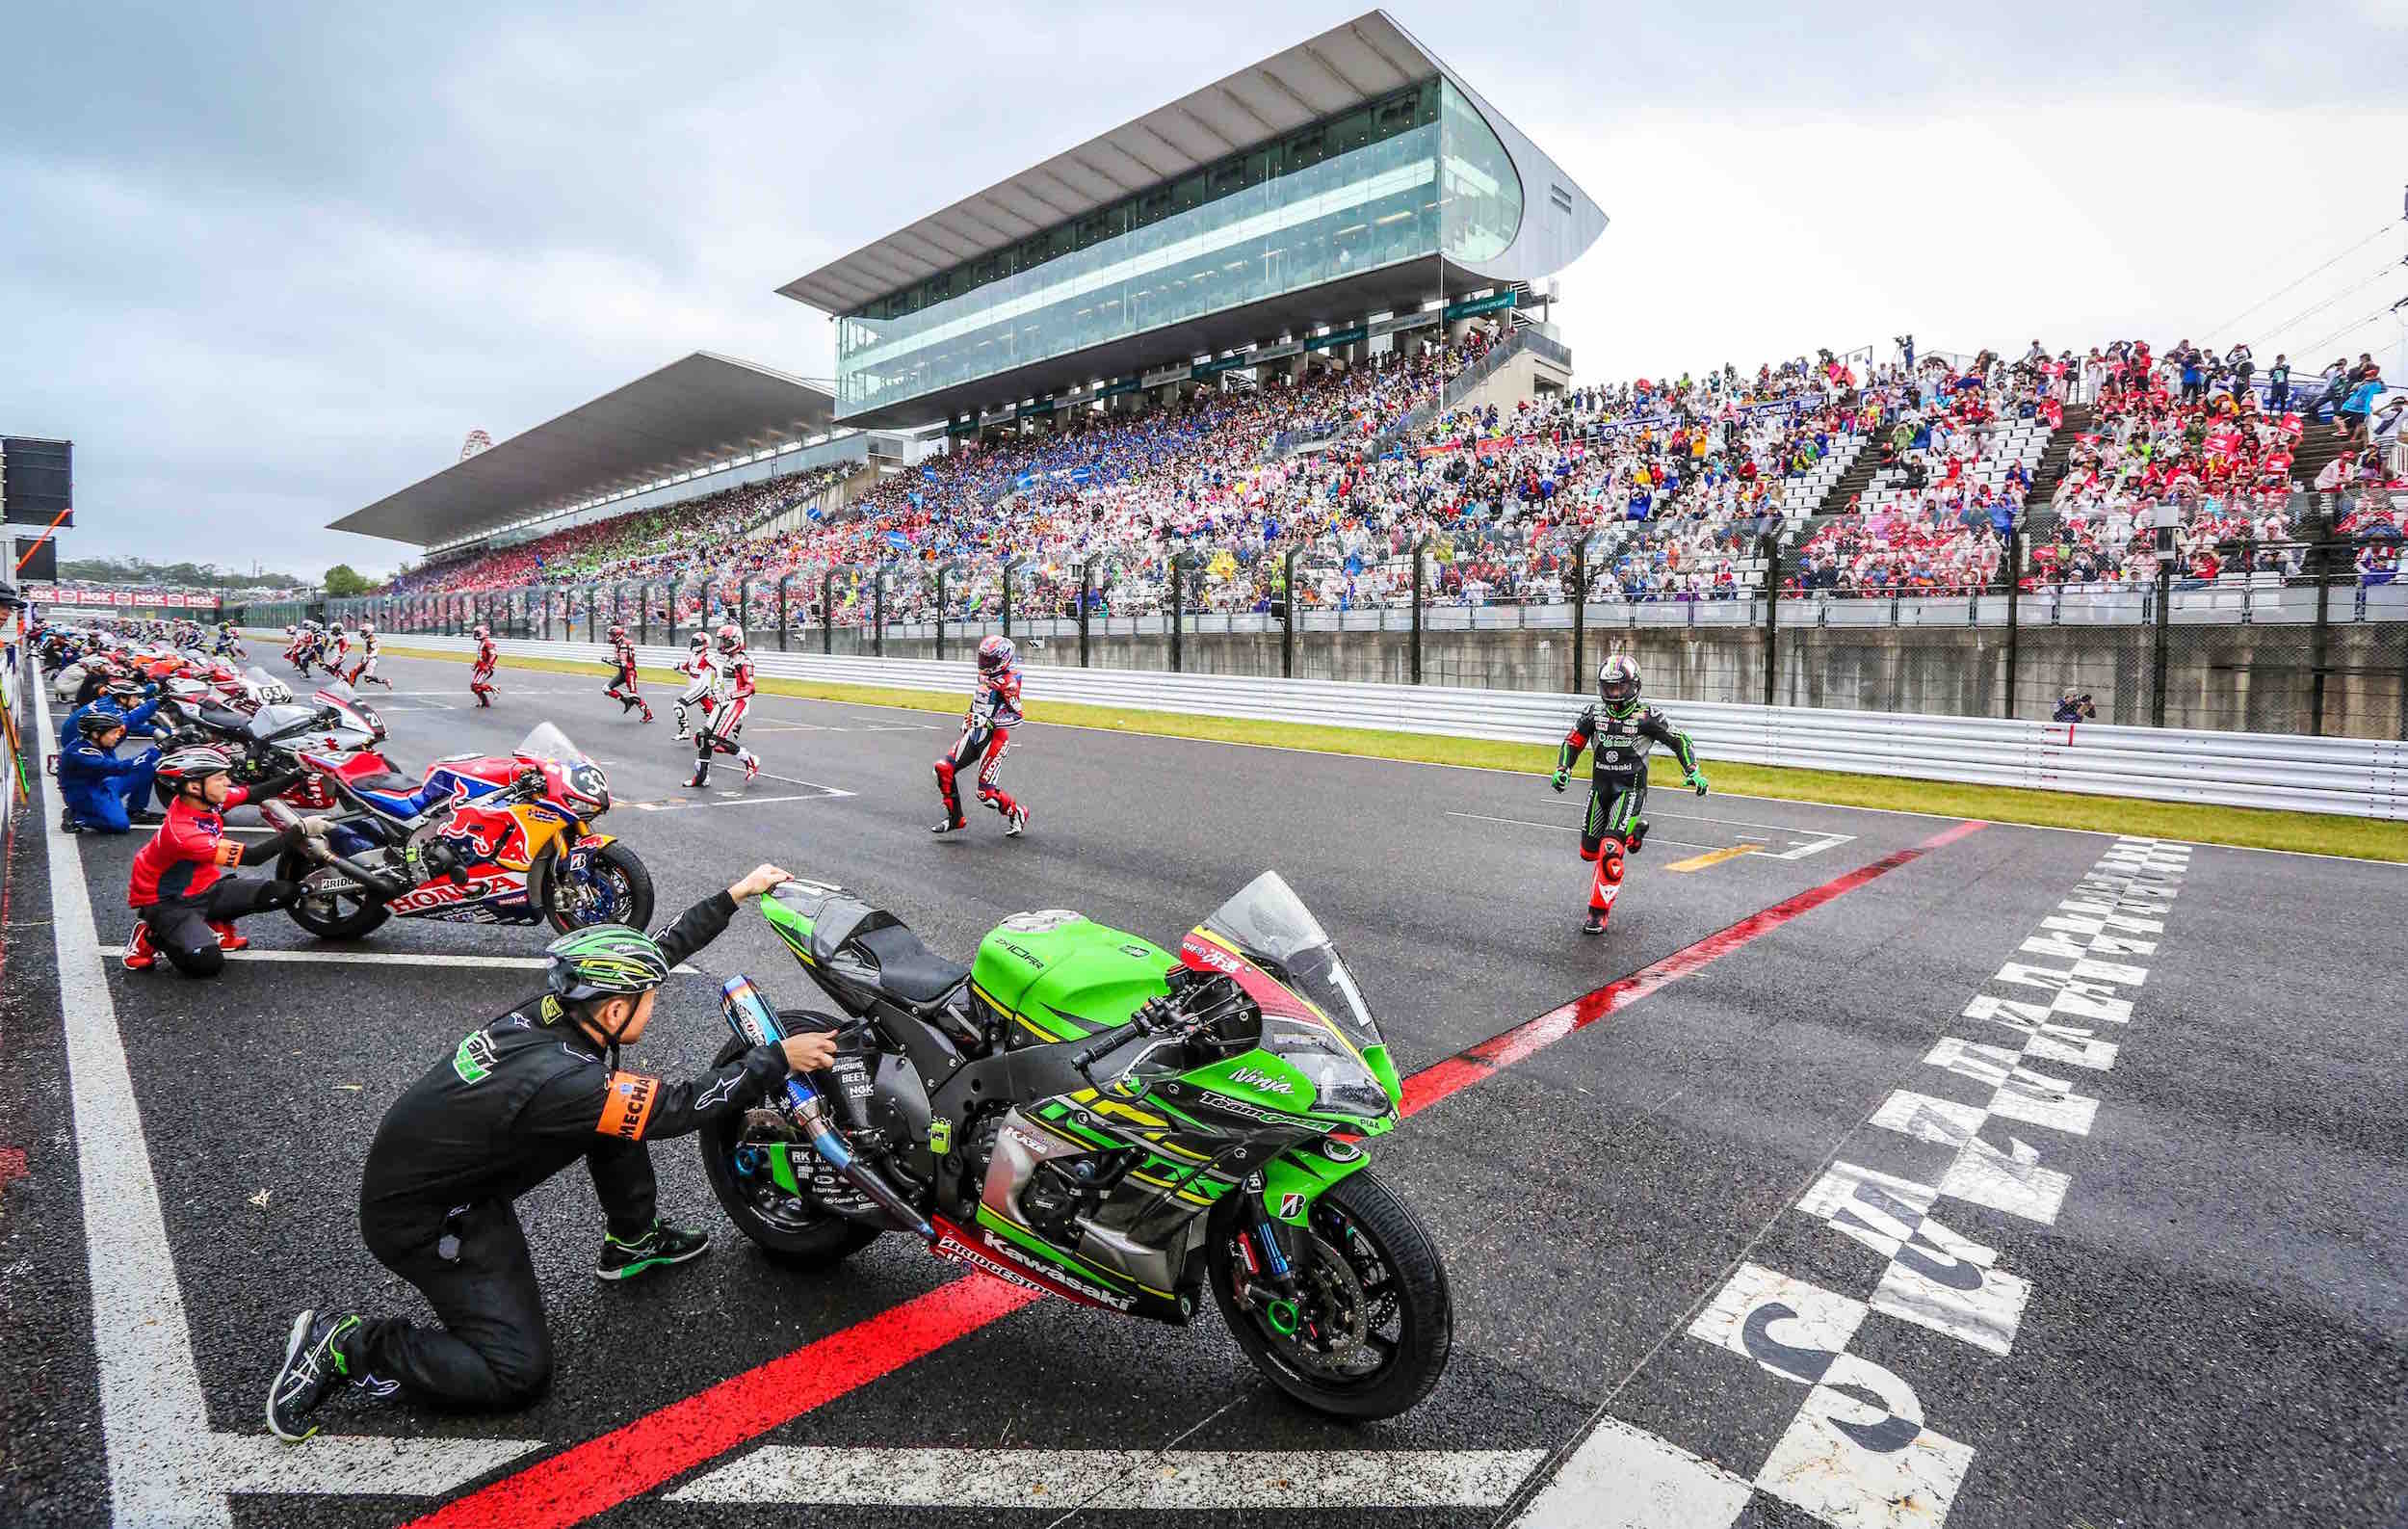 Bucket List Superbike Races: 8 Iconic Events Every Enthusiast Should Experience